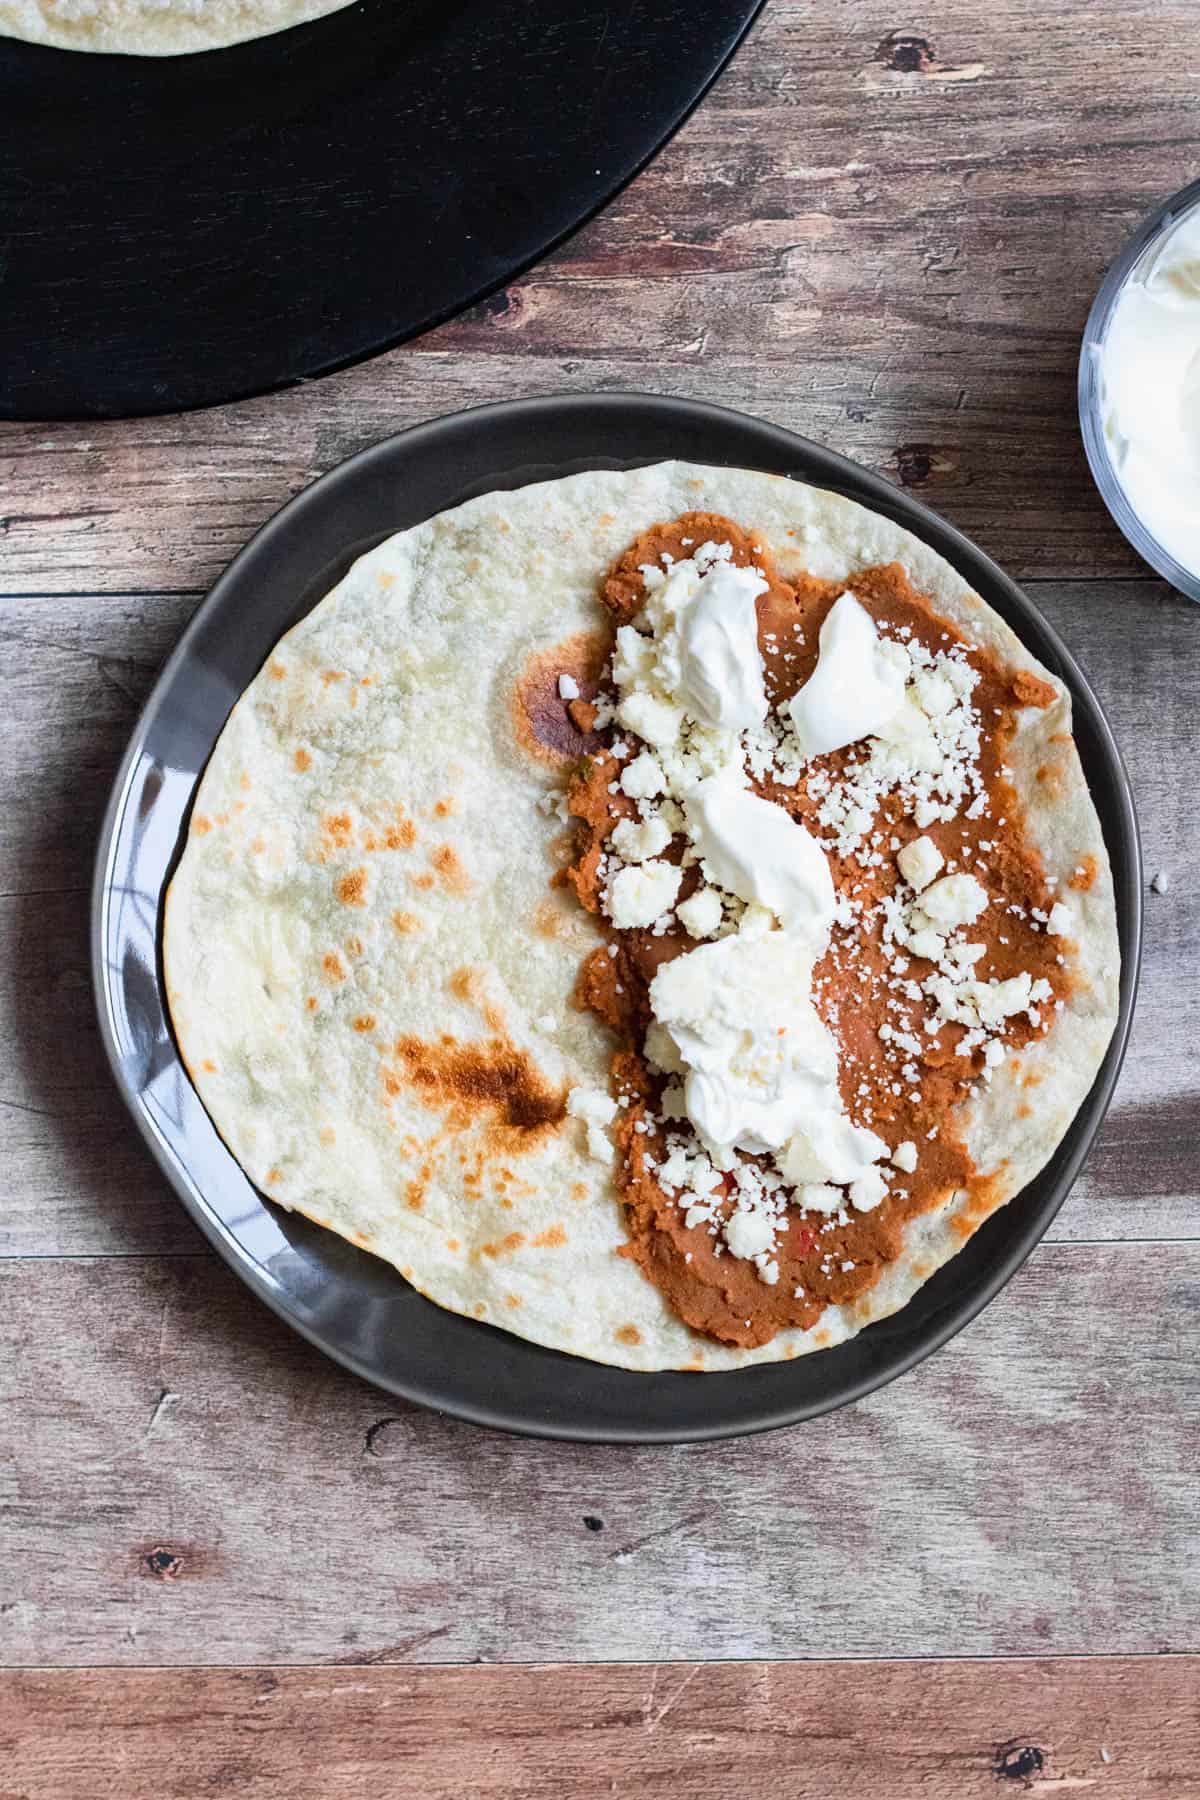 Dollops of sour cream are added to Baleadas Hondurenas over the refried beans and cotija cheese. 